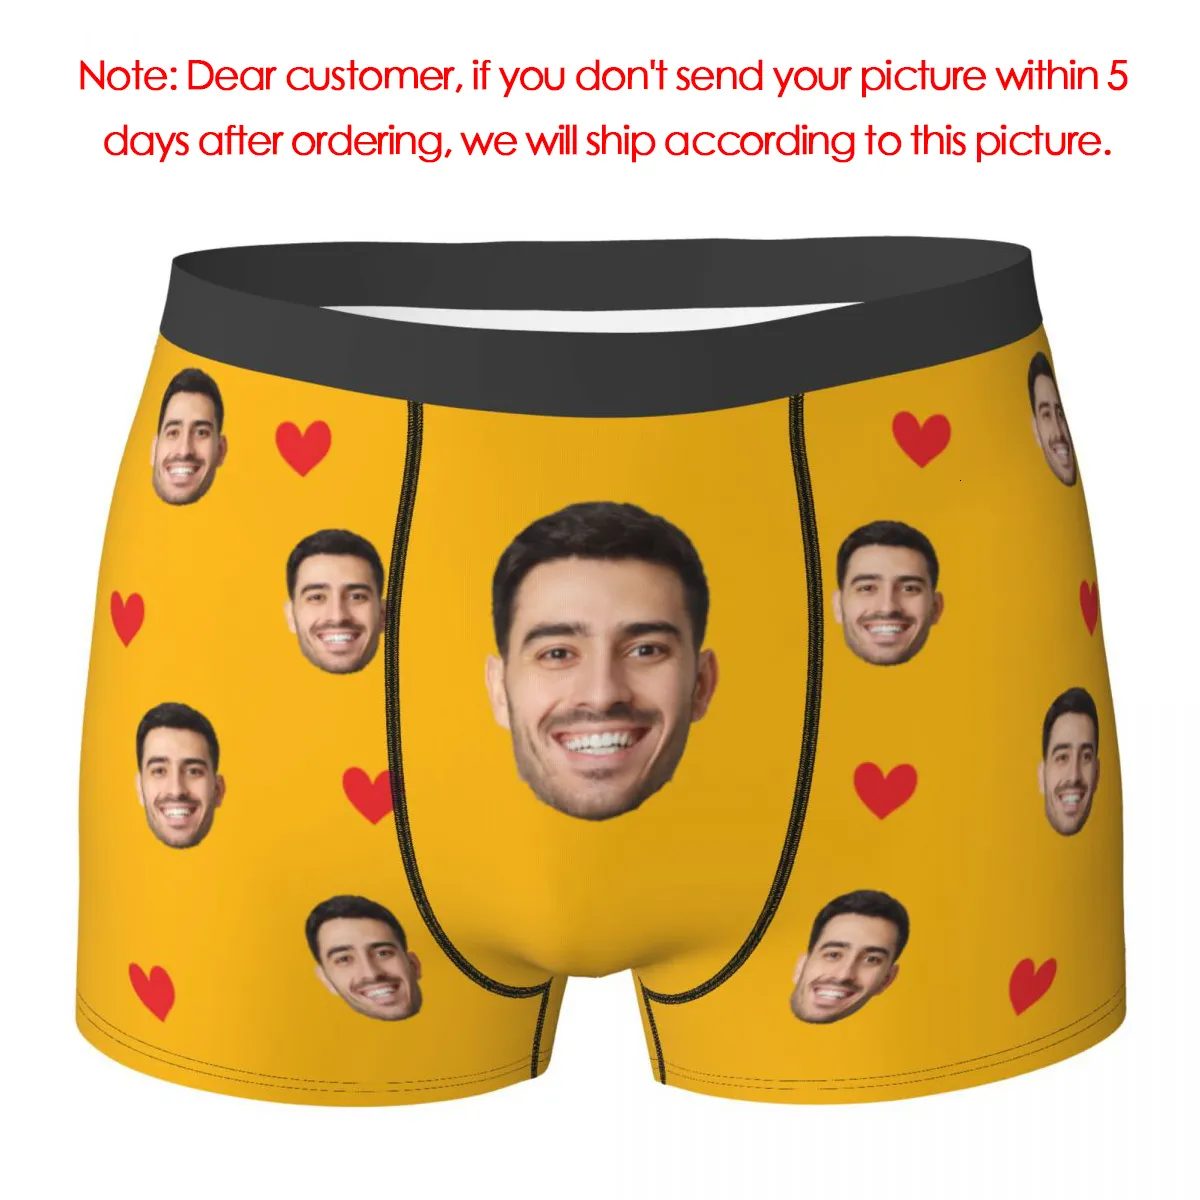 Custom Boxers With Face Designs - Face on Boxers Gift for Him